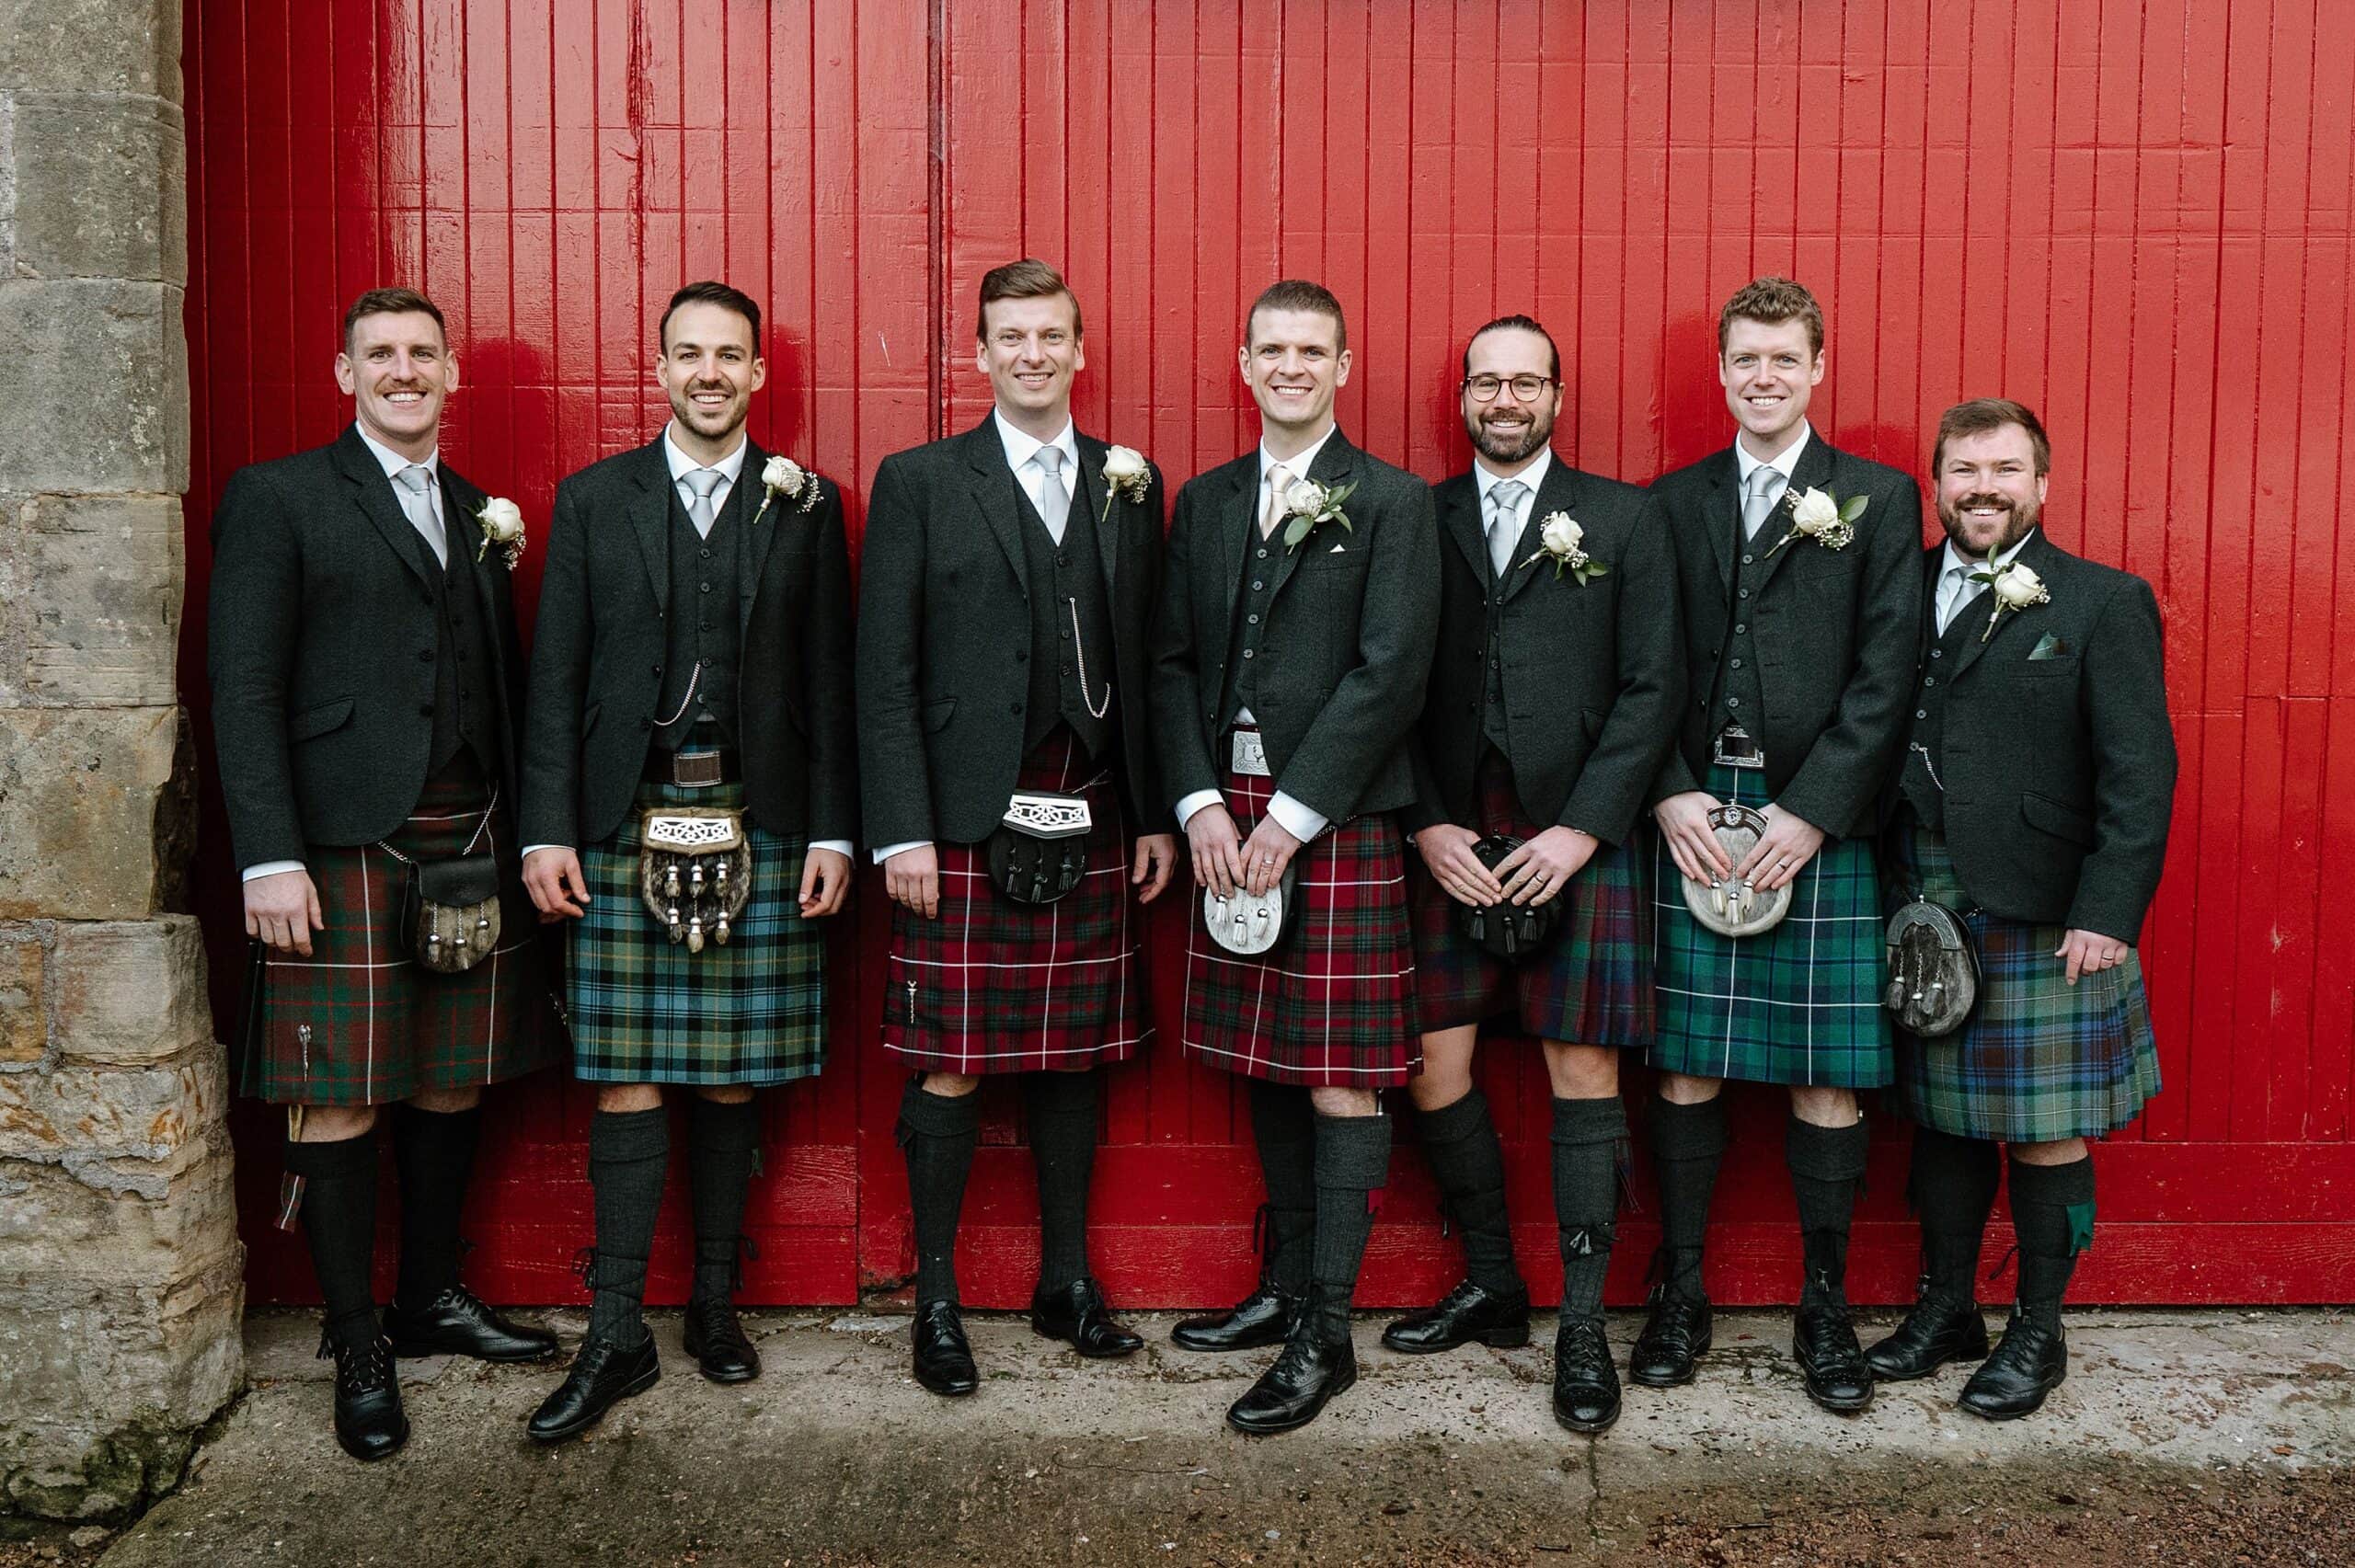 kinkell byre wedding photos of groom and groomsmen outside venue with red barn doors in background at st andrews wedding venue